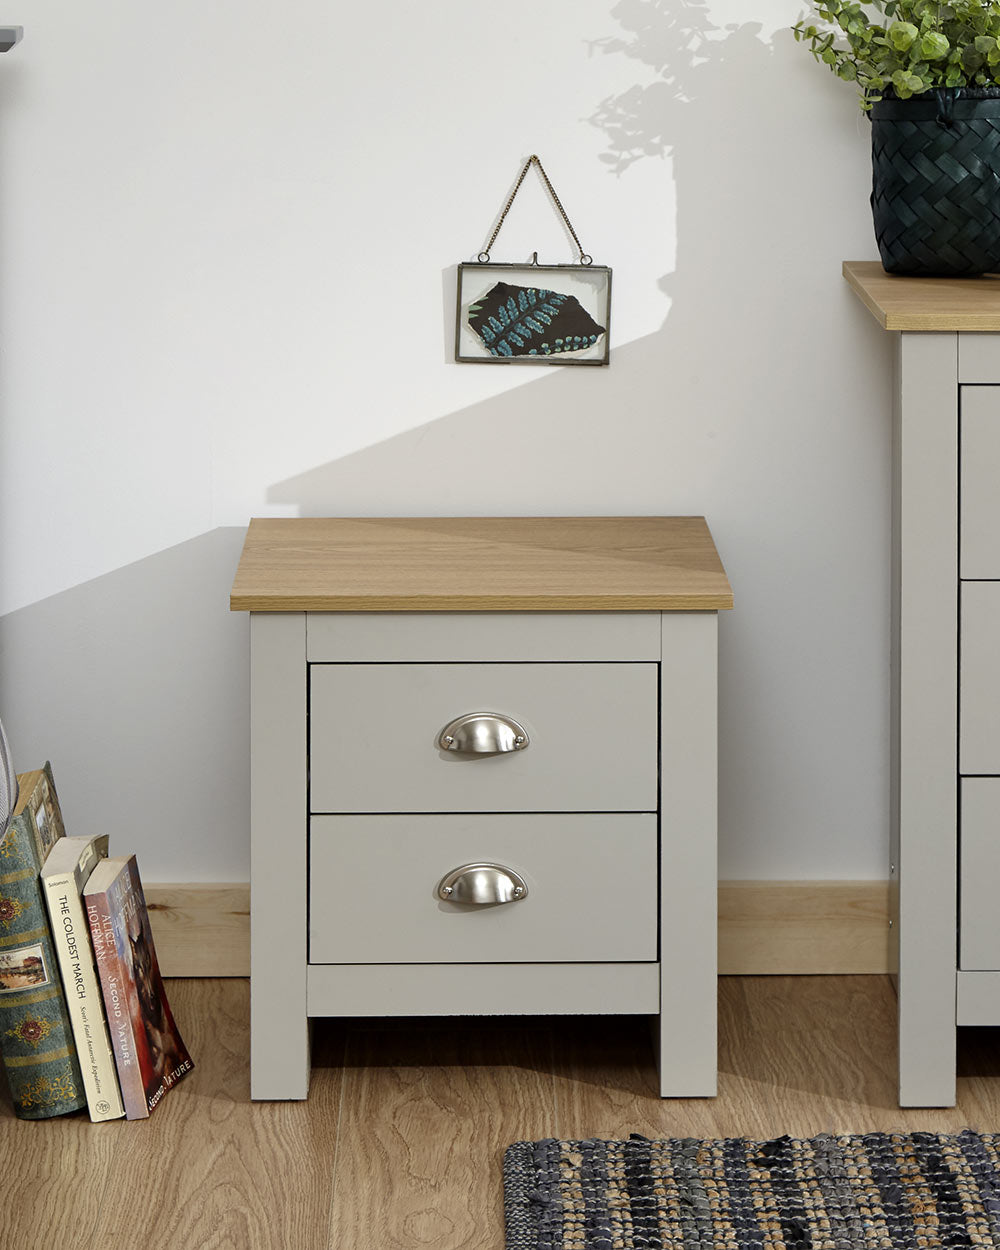 Lancaster 2 drawer bedside table cabinet in a lifestyle scene in a bedroom